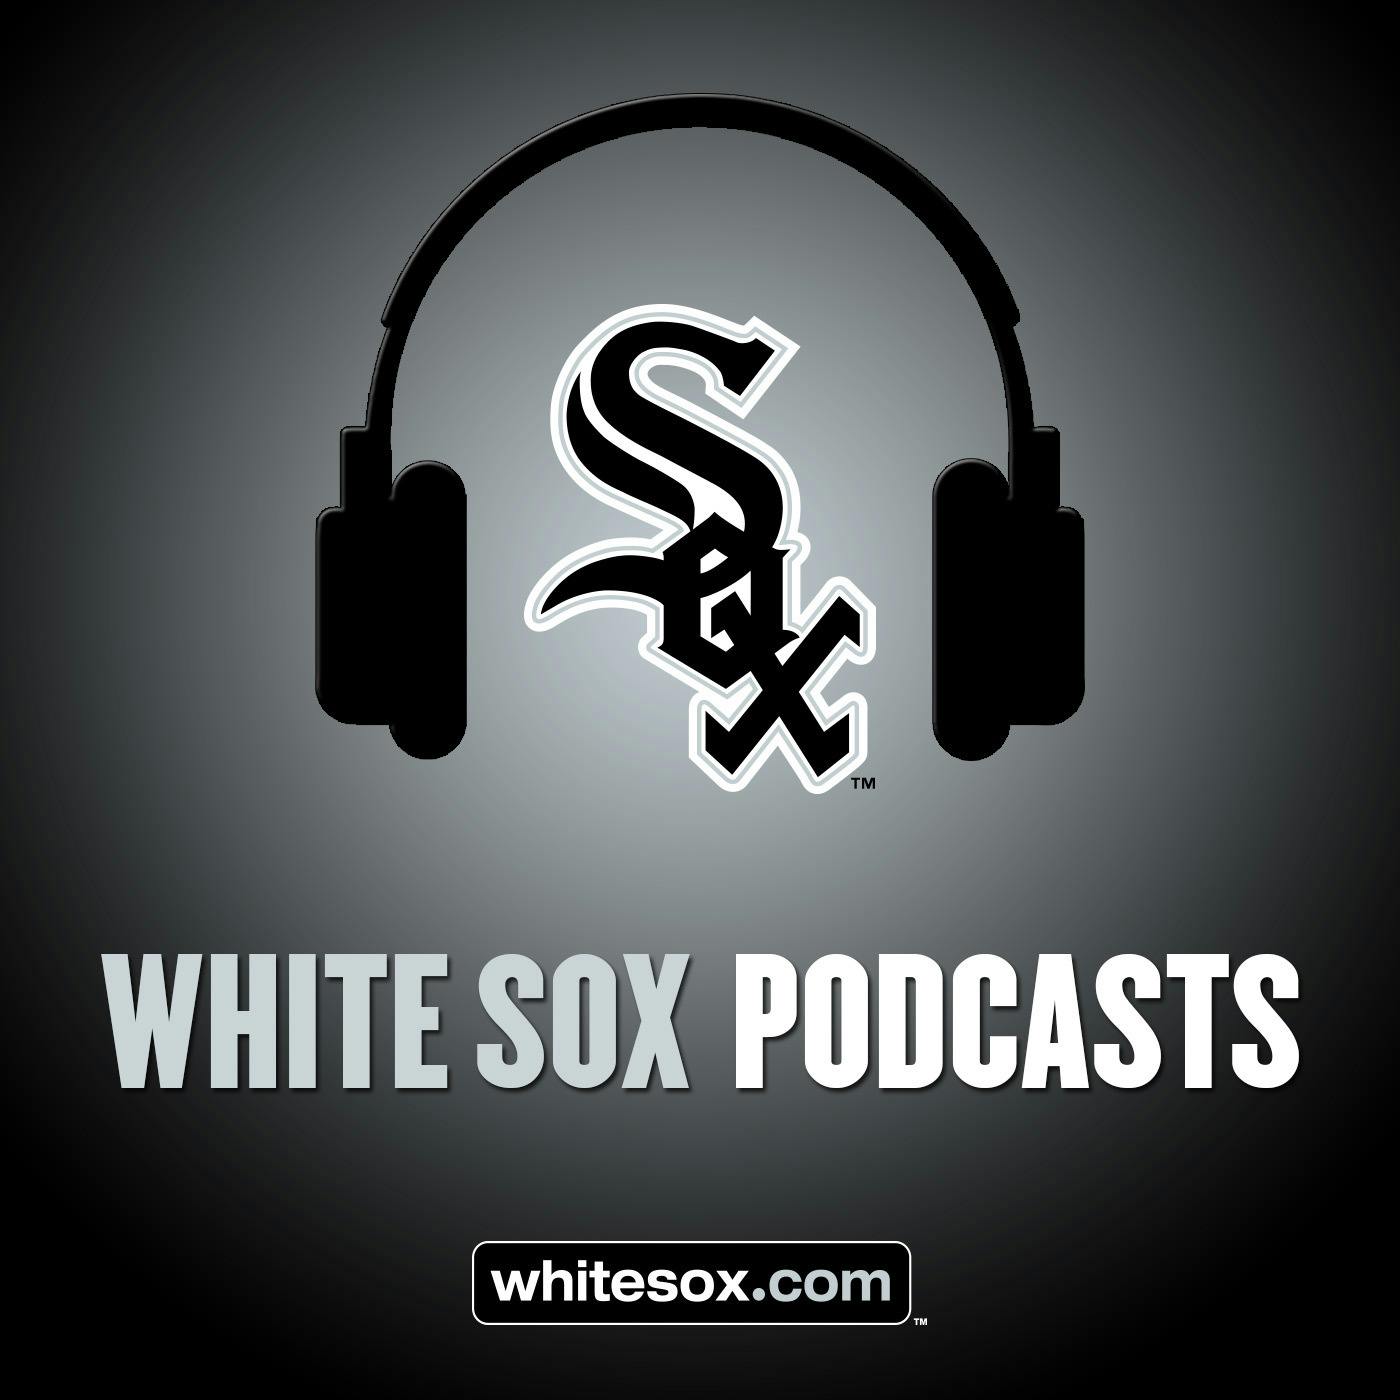 7/20/19: White Sox Weekly